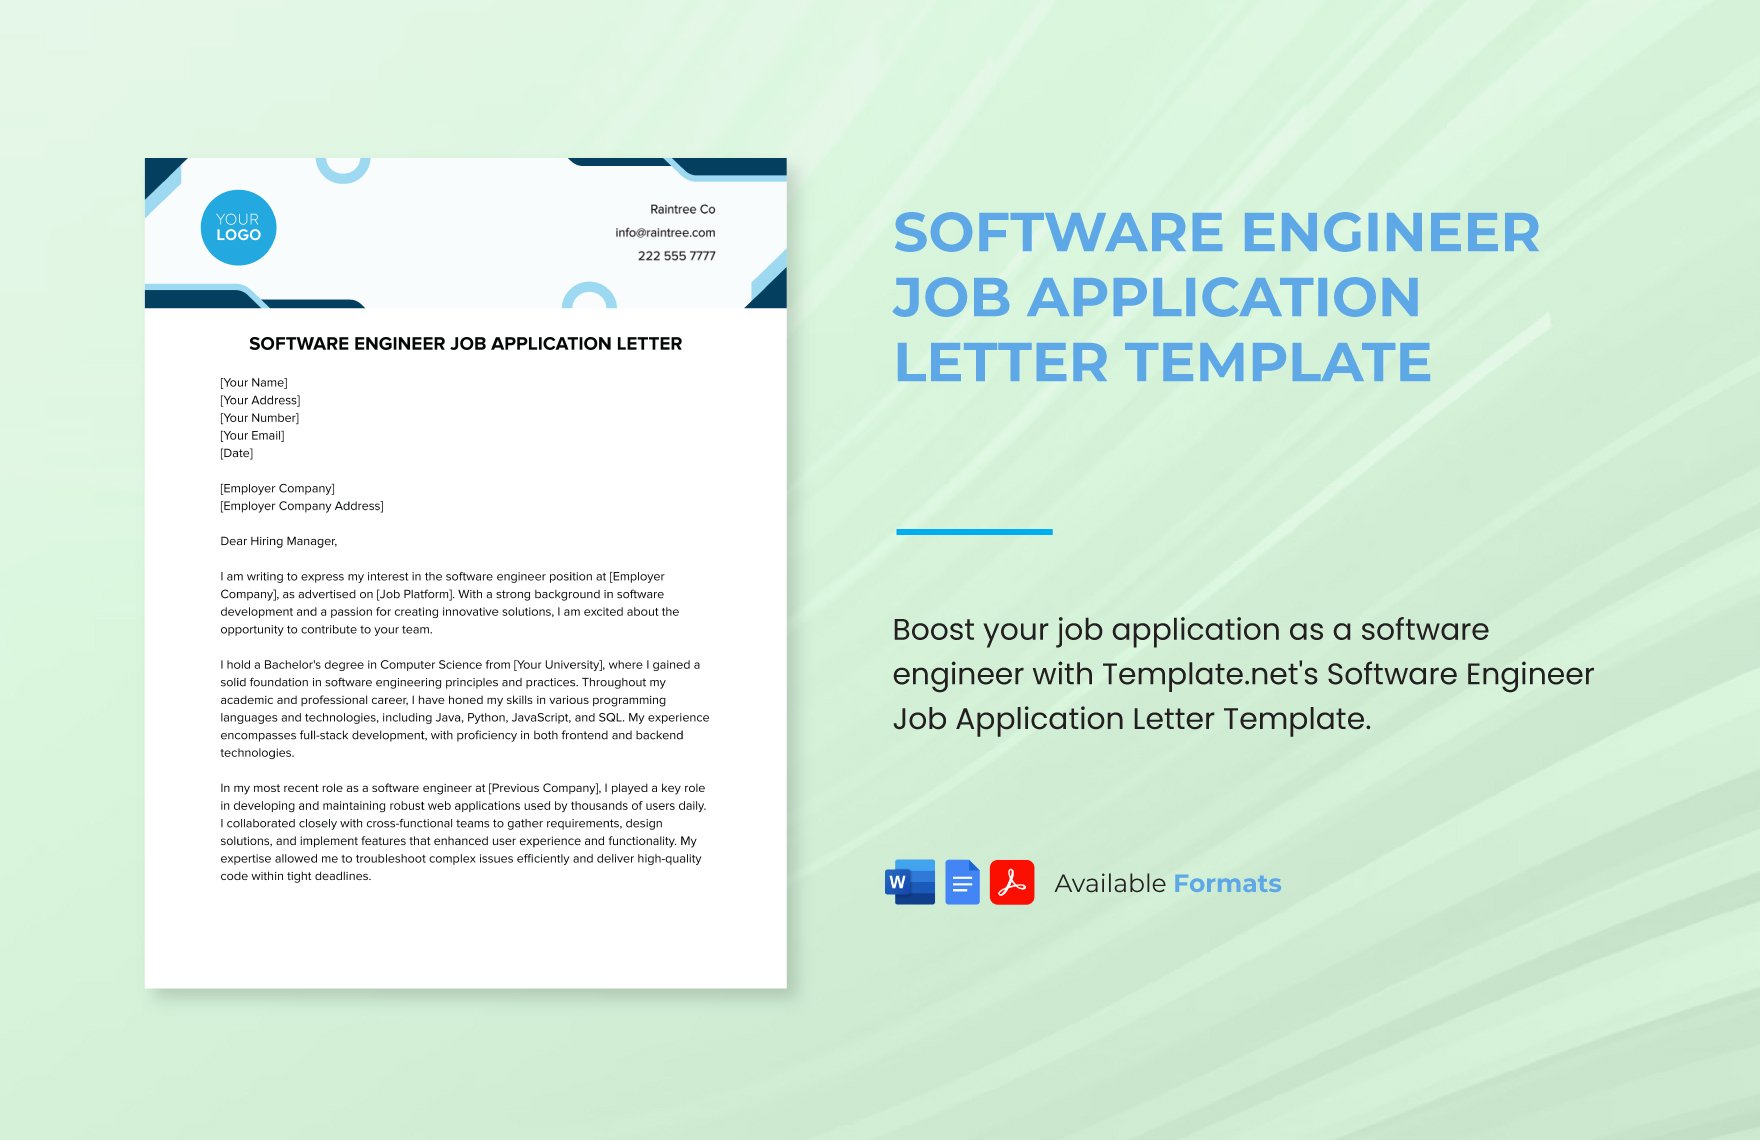 Software Engineer Job Application Letter Template in Word, Google Docs, PDF